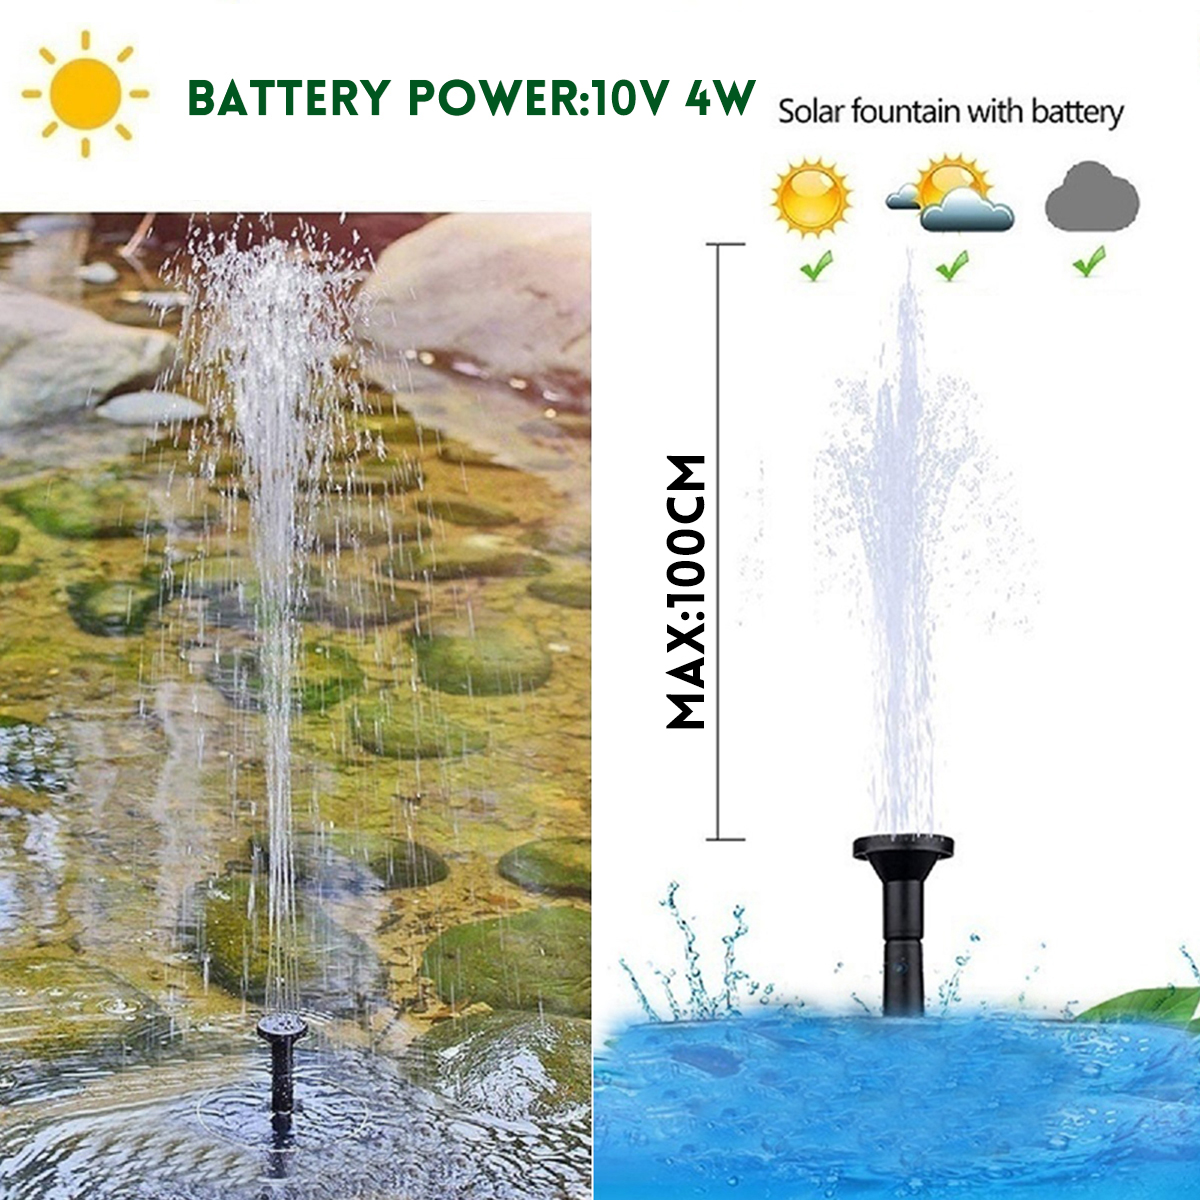 4W-10V-380LH-Solar-Panel-Water-Pump-Landscape-Pond-Pool-Aquarium-Floating-Fountain-with-6-Nozzles-1543610-4